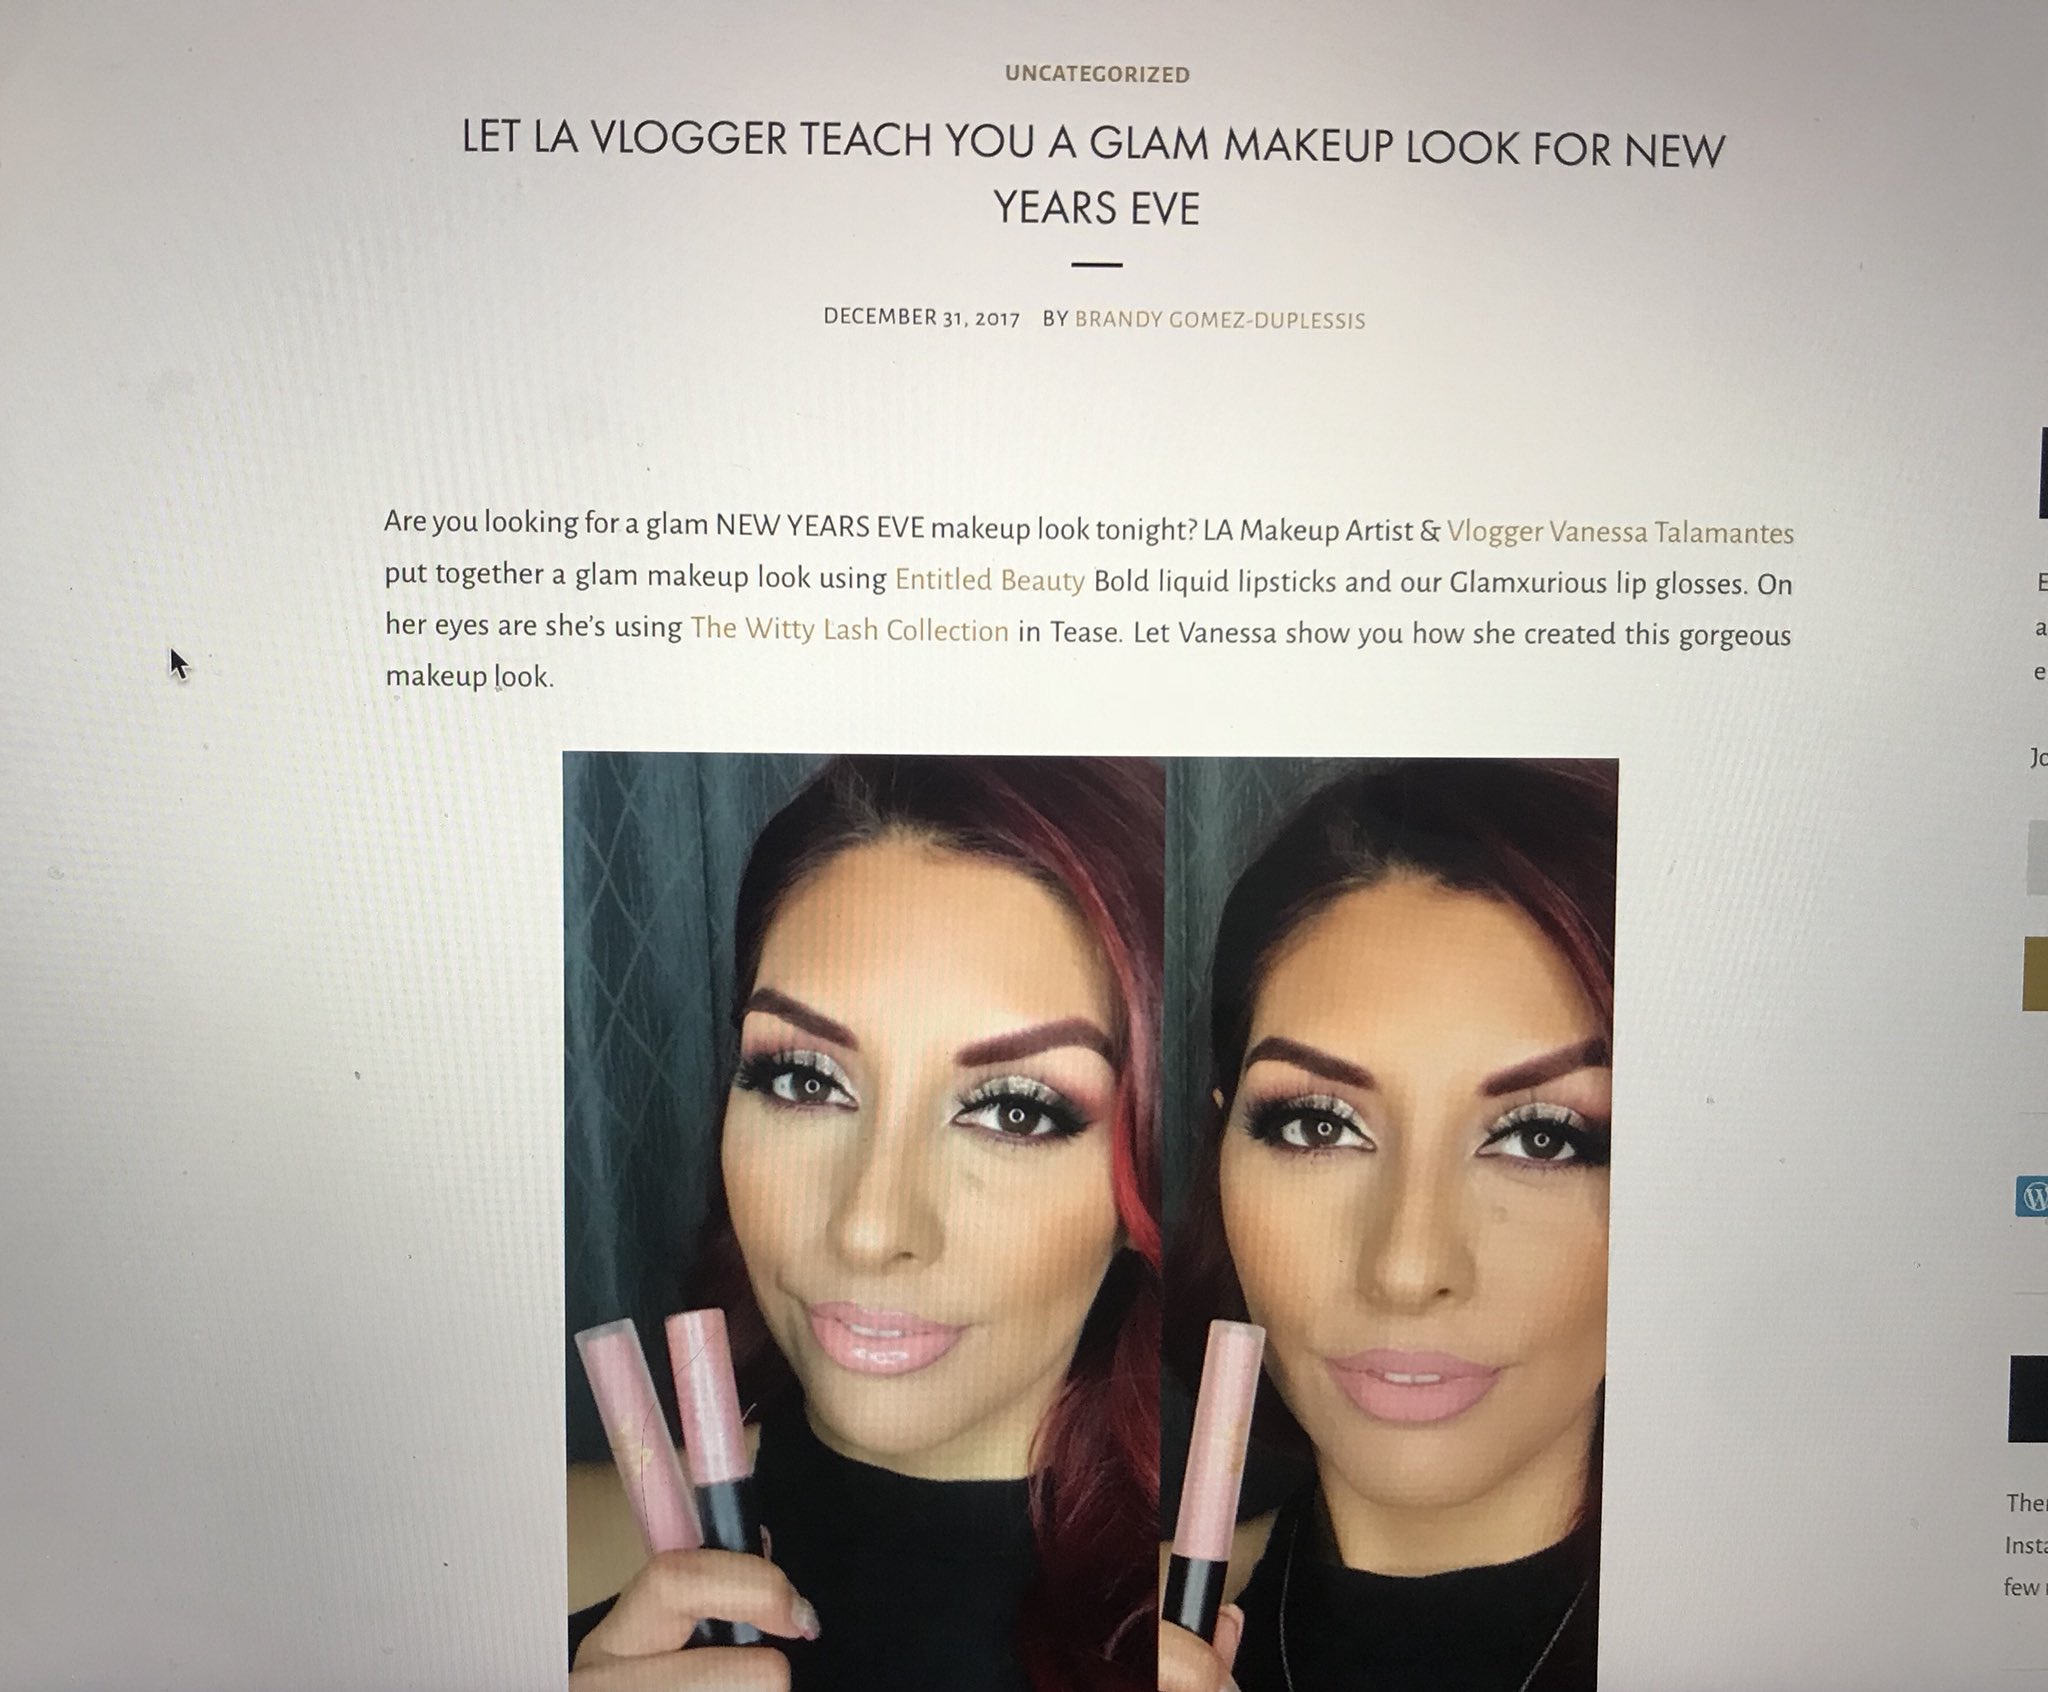 Vanessa Talamantes On Twitter Check Out This Article I Just Found This Morning Of My New Years Makeup Glam Wearing Lip Colors By Beauty Brand Entitled Beauty Https T Co Xliw1vvark Beautyblogger Makeupartist Lamua Entitledbeauty